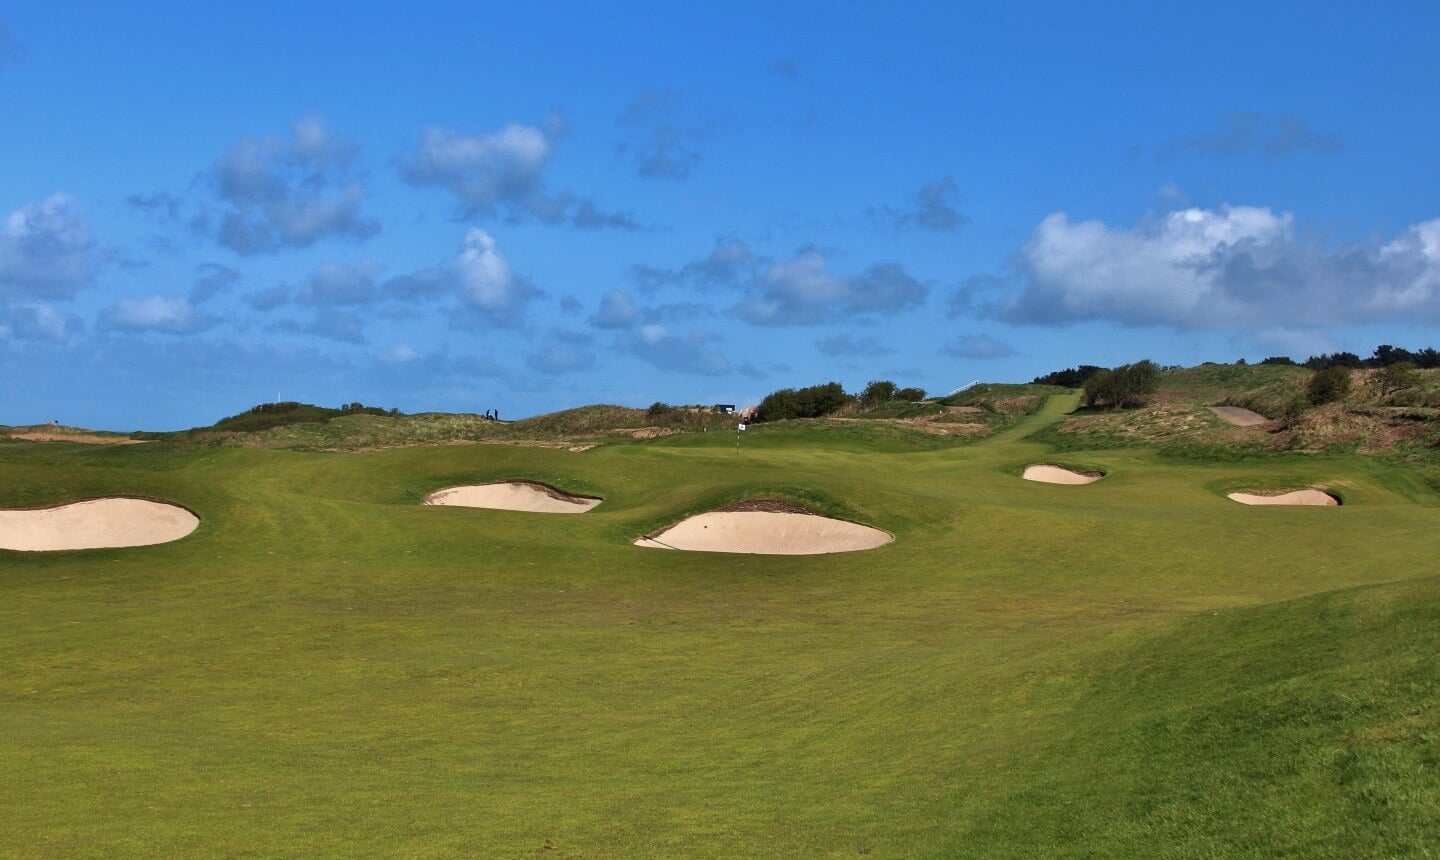 Image depicting the 2nd green and surrounding pot bunkers at Royal Portrush Dunluce Golf Course, Portrush, County Antrim, Northern Ireland